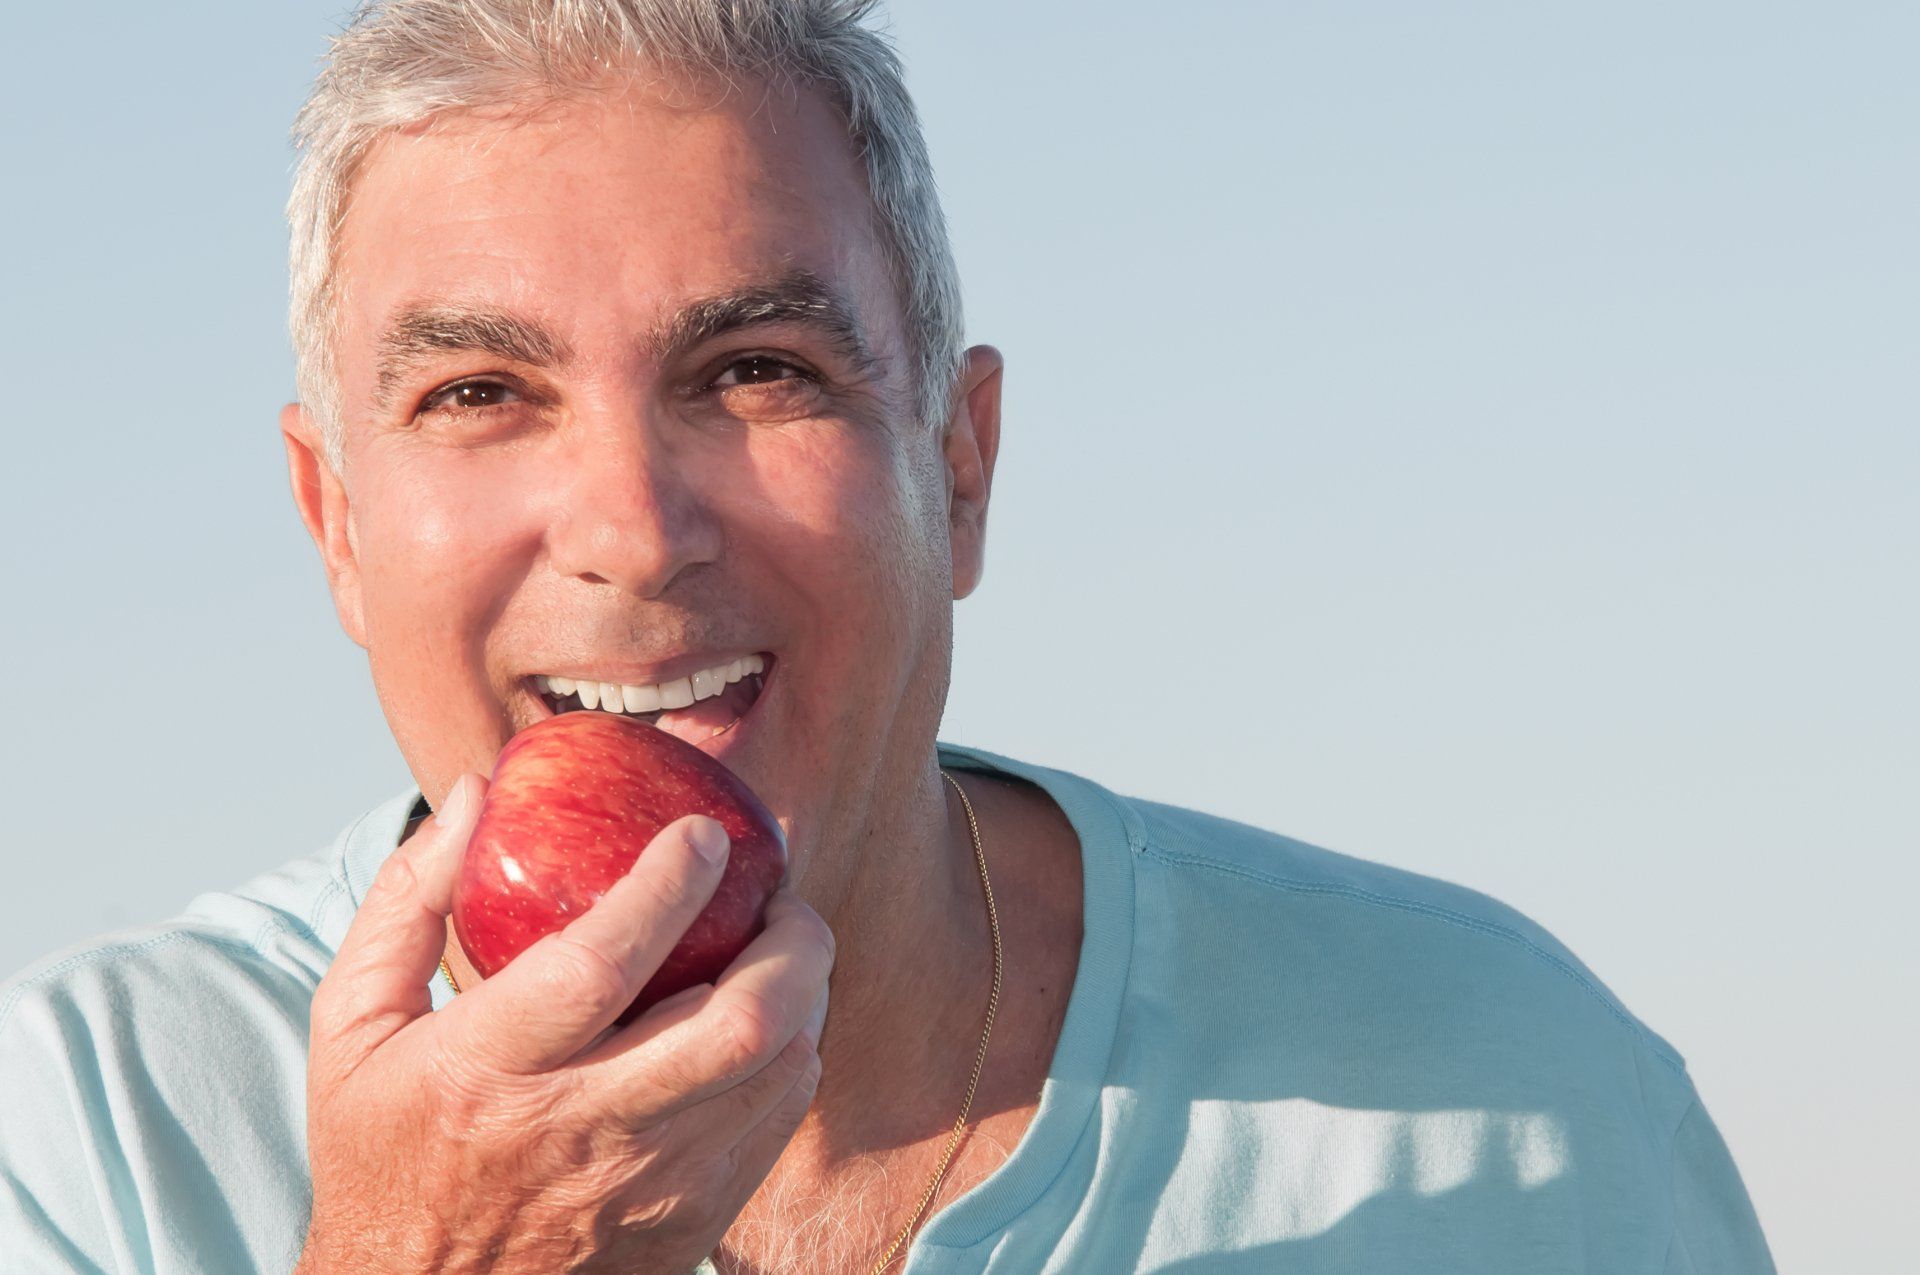 a man in a blue shirt is biting into a red apple